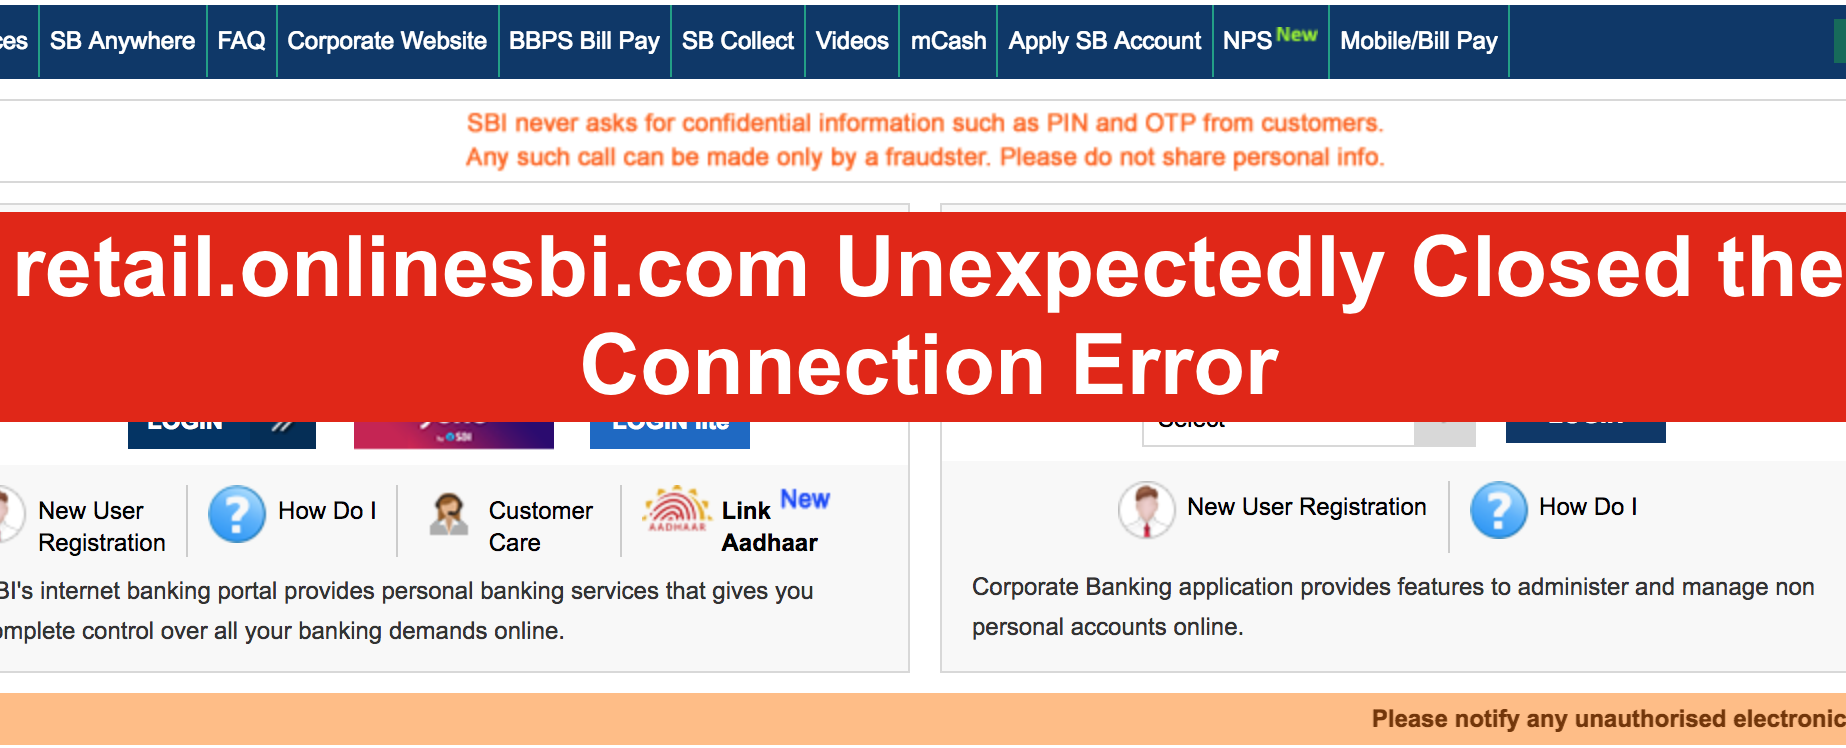 retail.onlinesbi.com Unexpectedly Closed the Connection Error | Site Cannot Be Reached